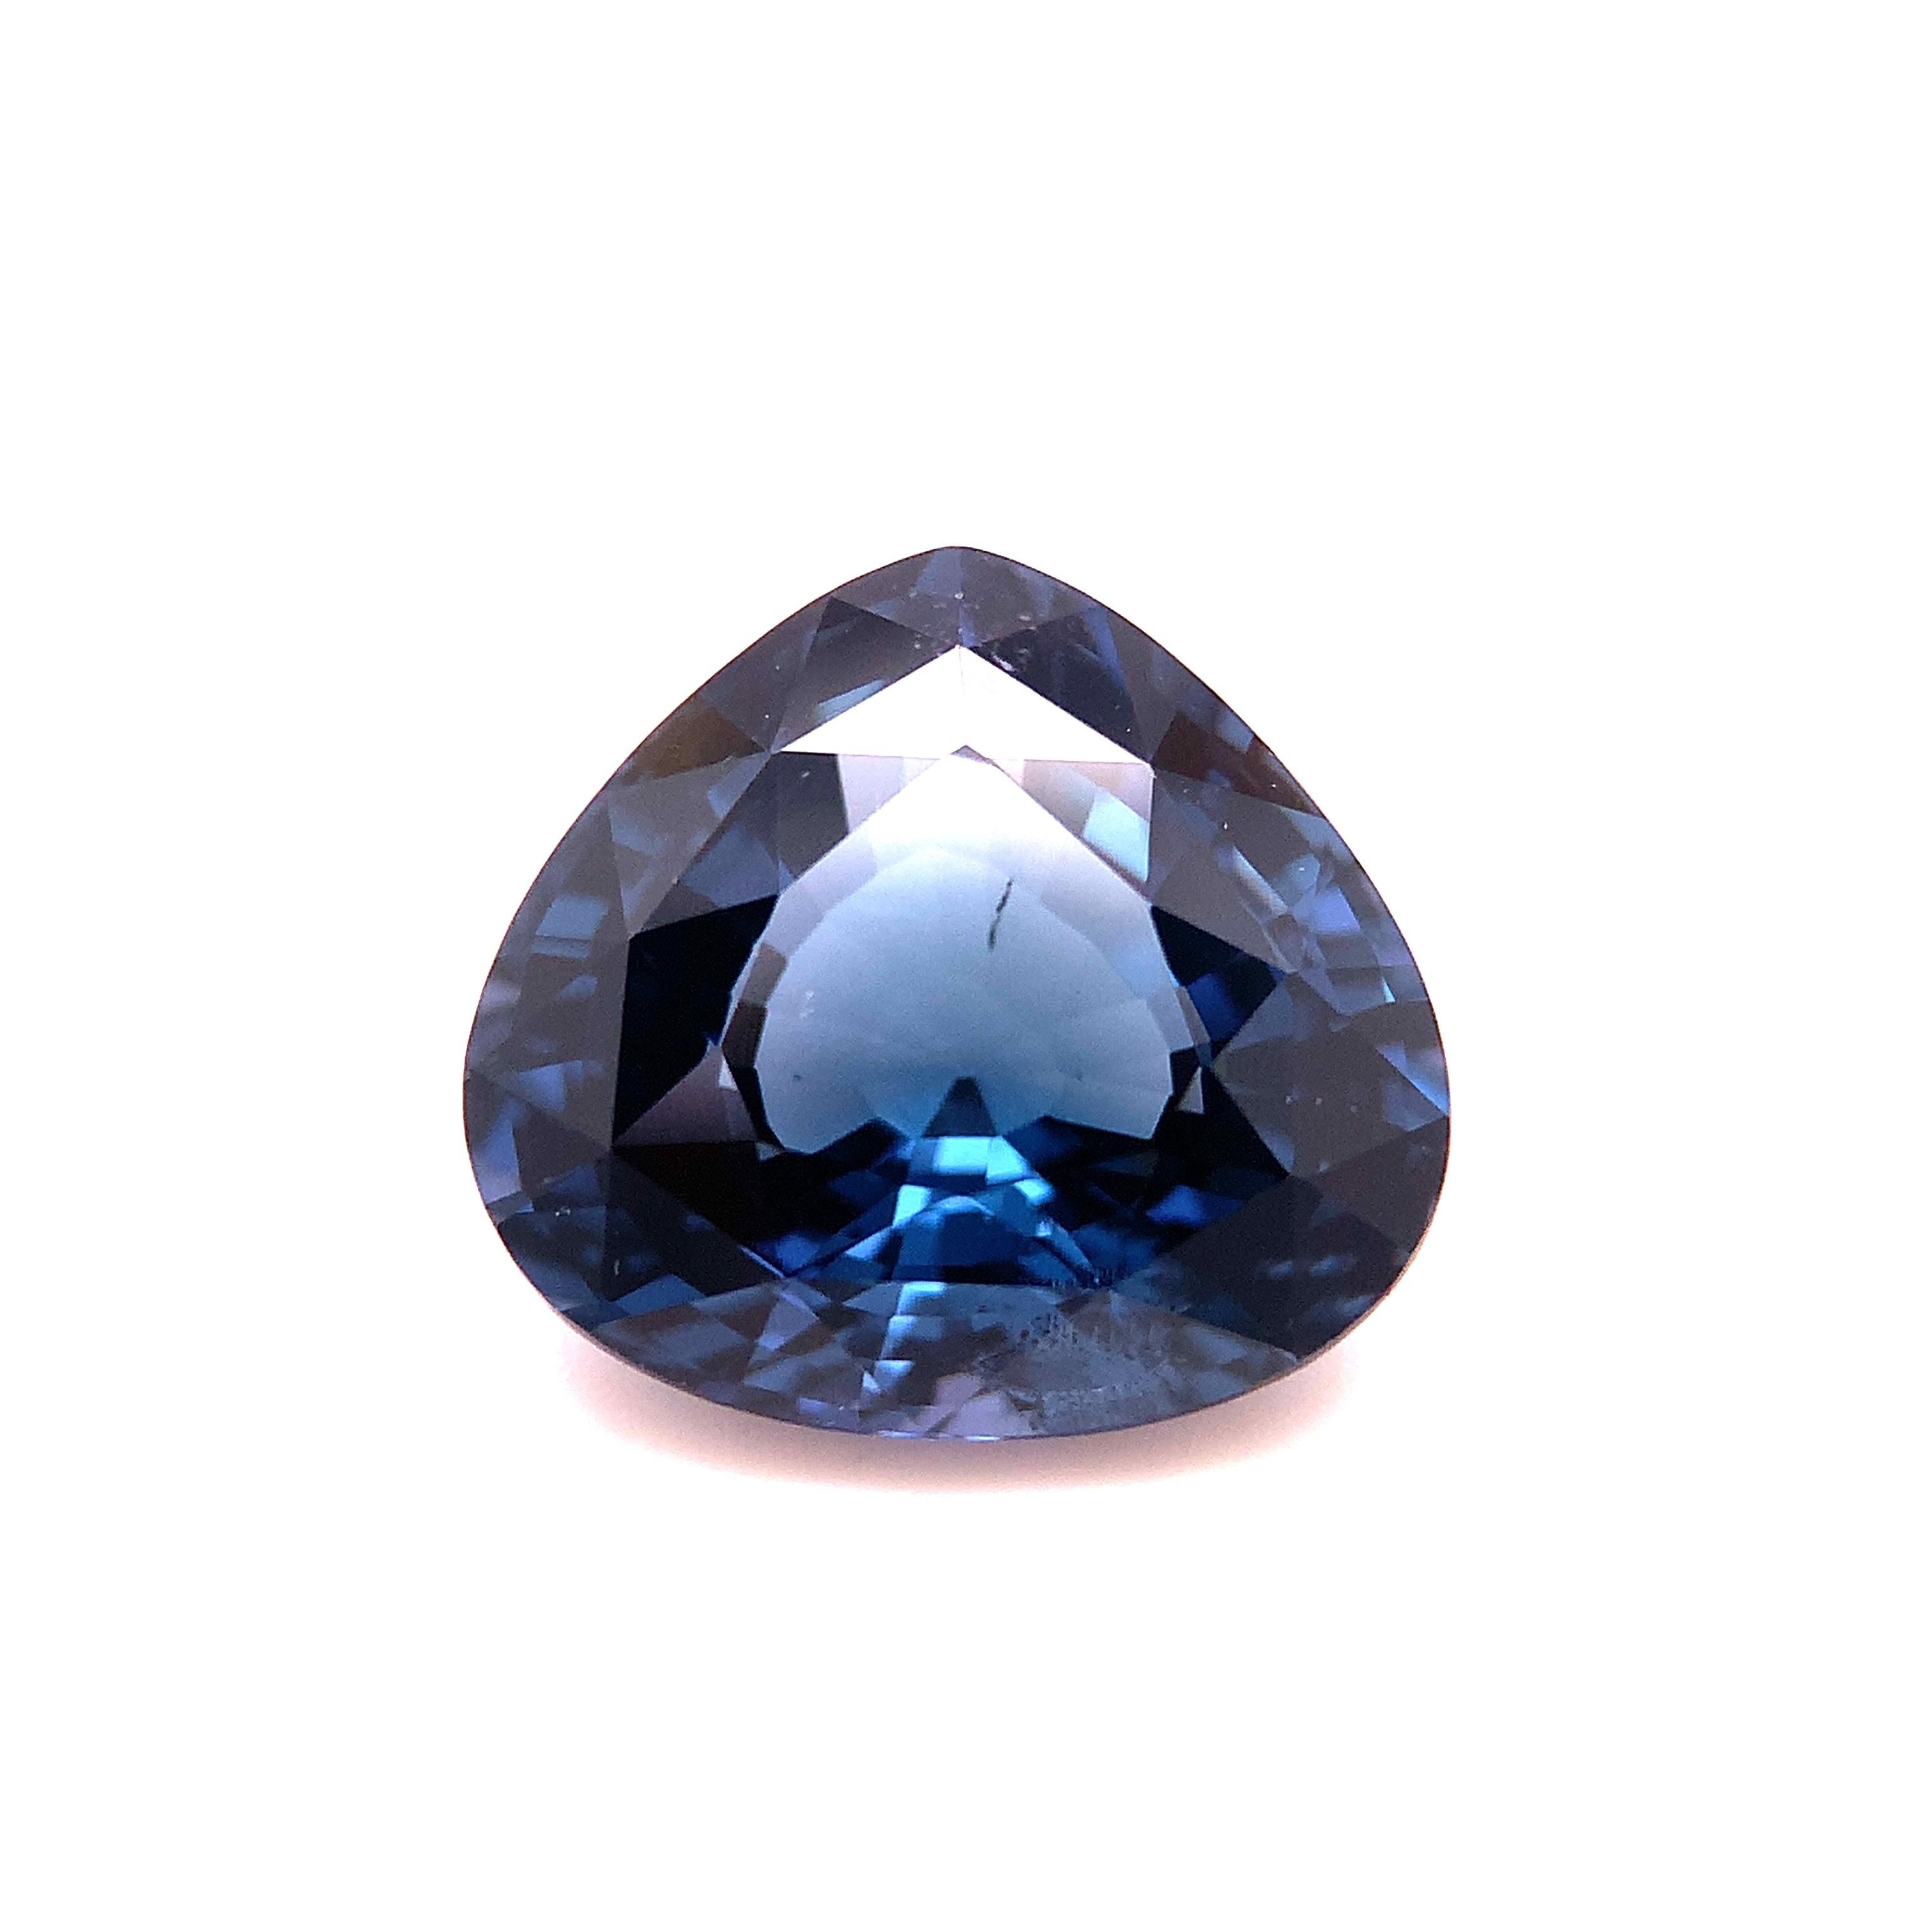 Women's or Men's Unheated 5.02 Carat Blue Spinel, Loose Gemstone, GIA Certified ..... A For Sale